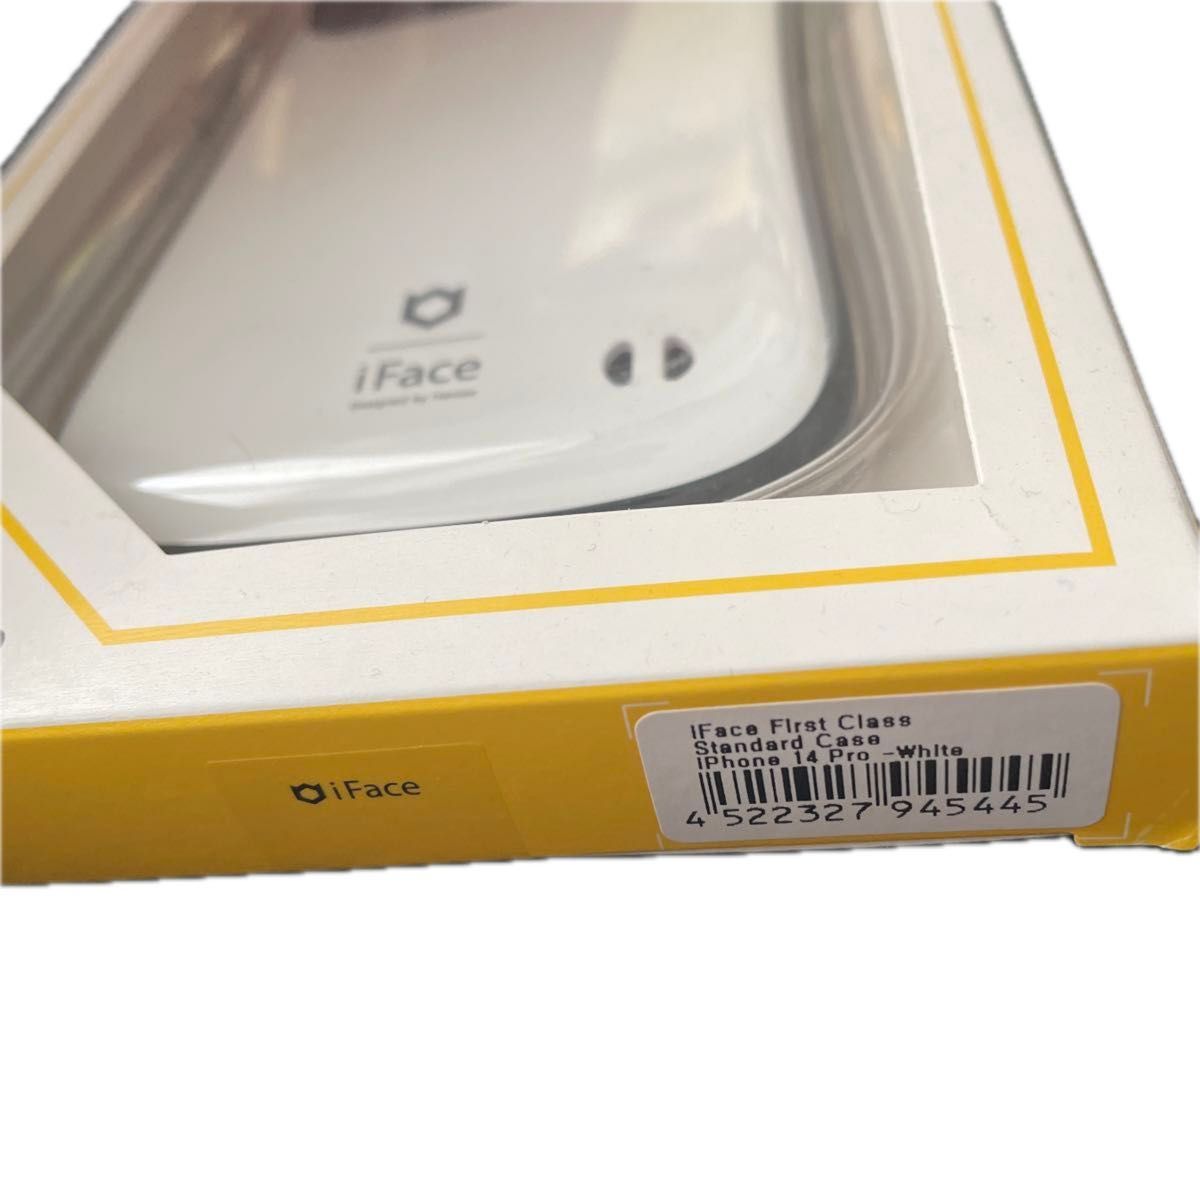 iPhone 14 Pro iFace First Class Standardケース 41-945445（ホワイト）